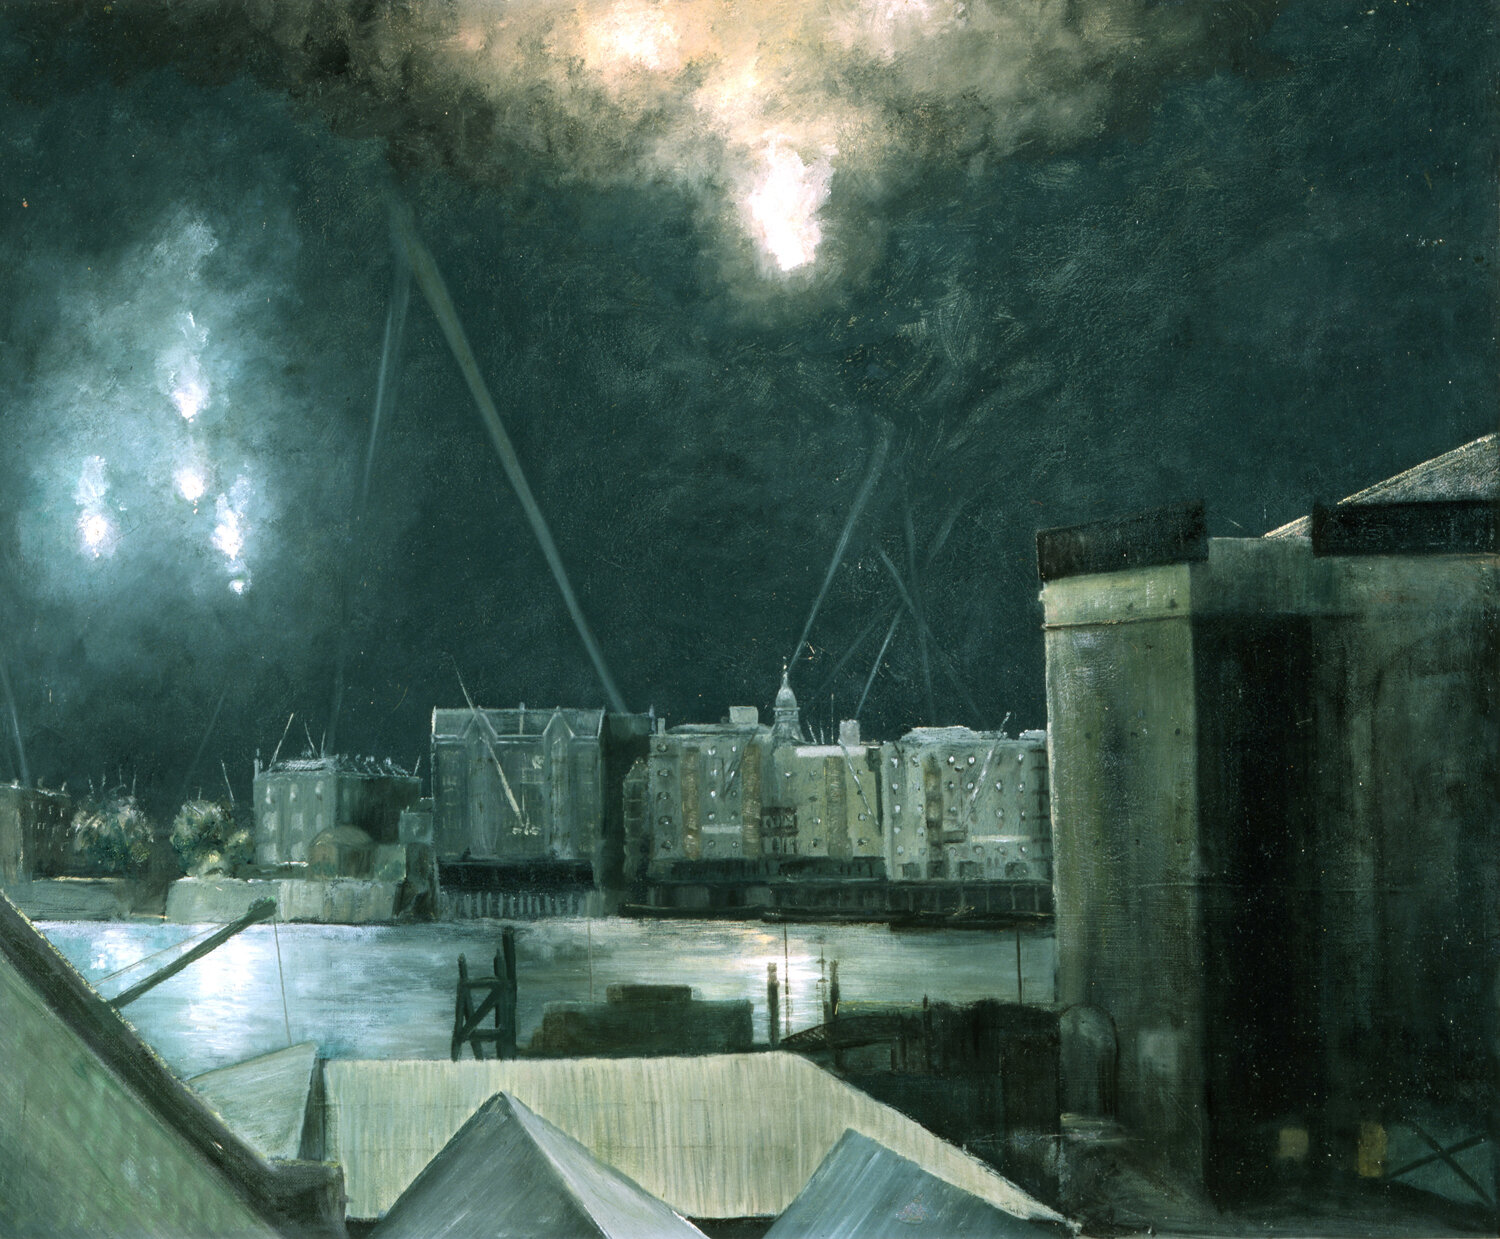 Night Raid Over London Docklands by ‘fireman artist’ Wilfred Stanley Haines